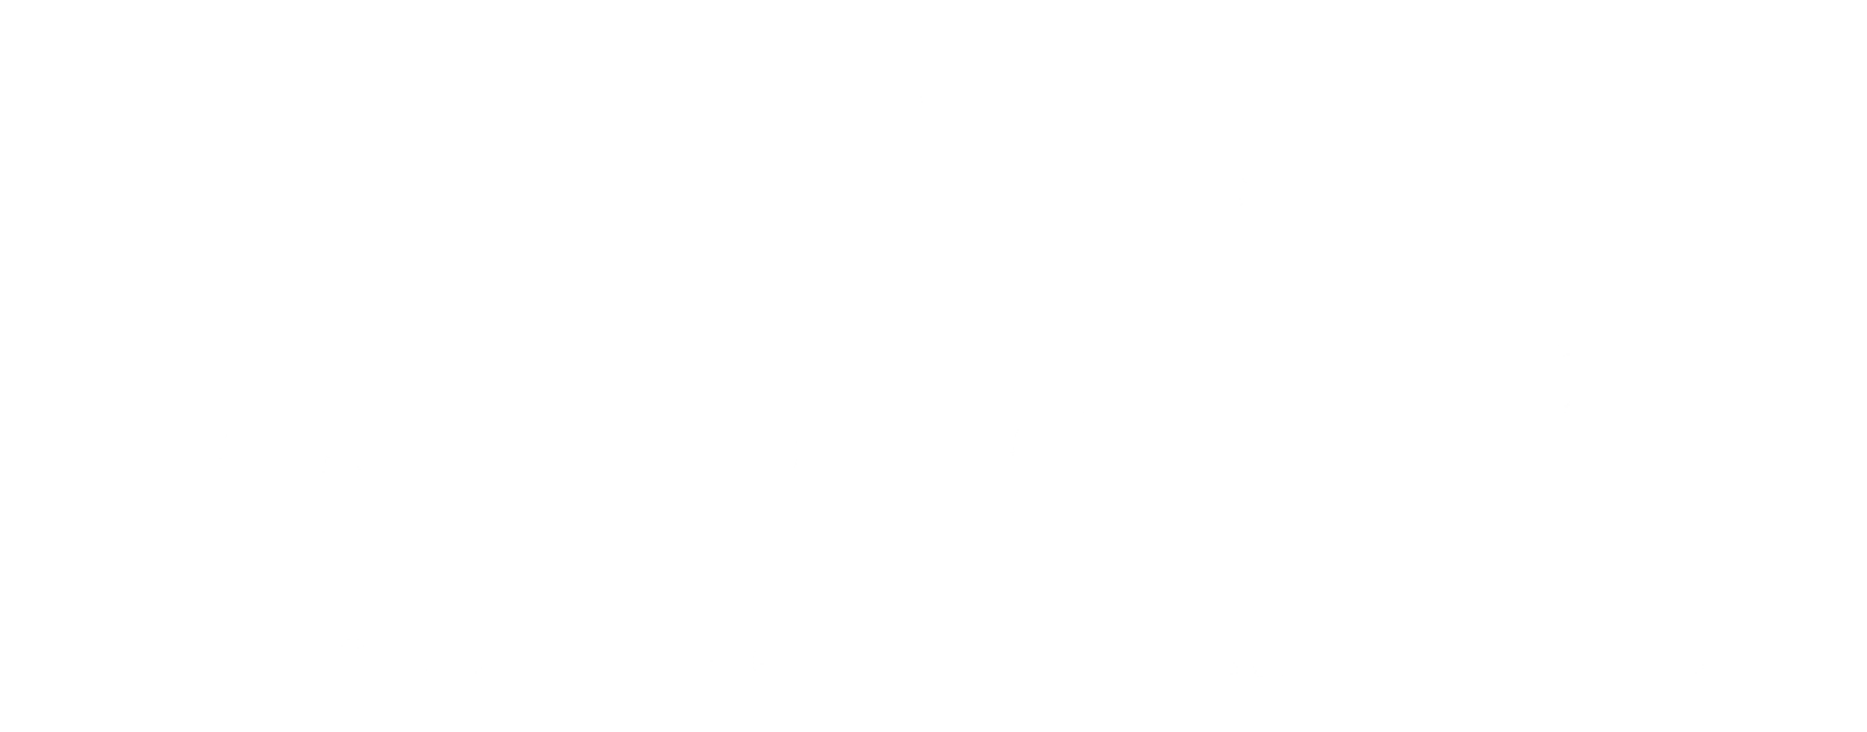 (Out of) Office Hours with Chris Lavigne